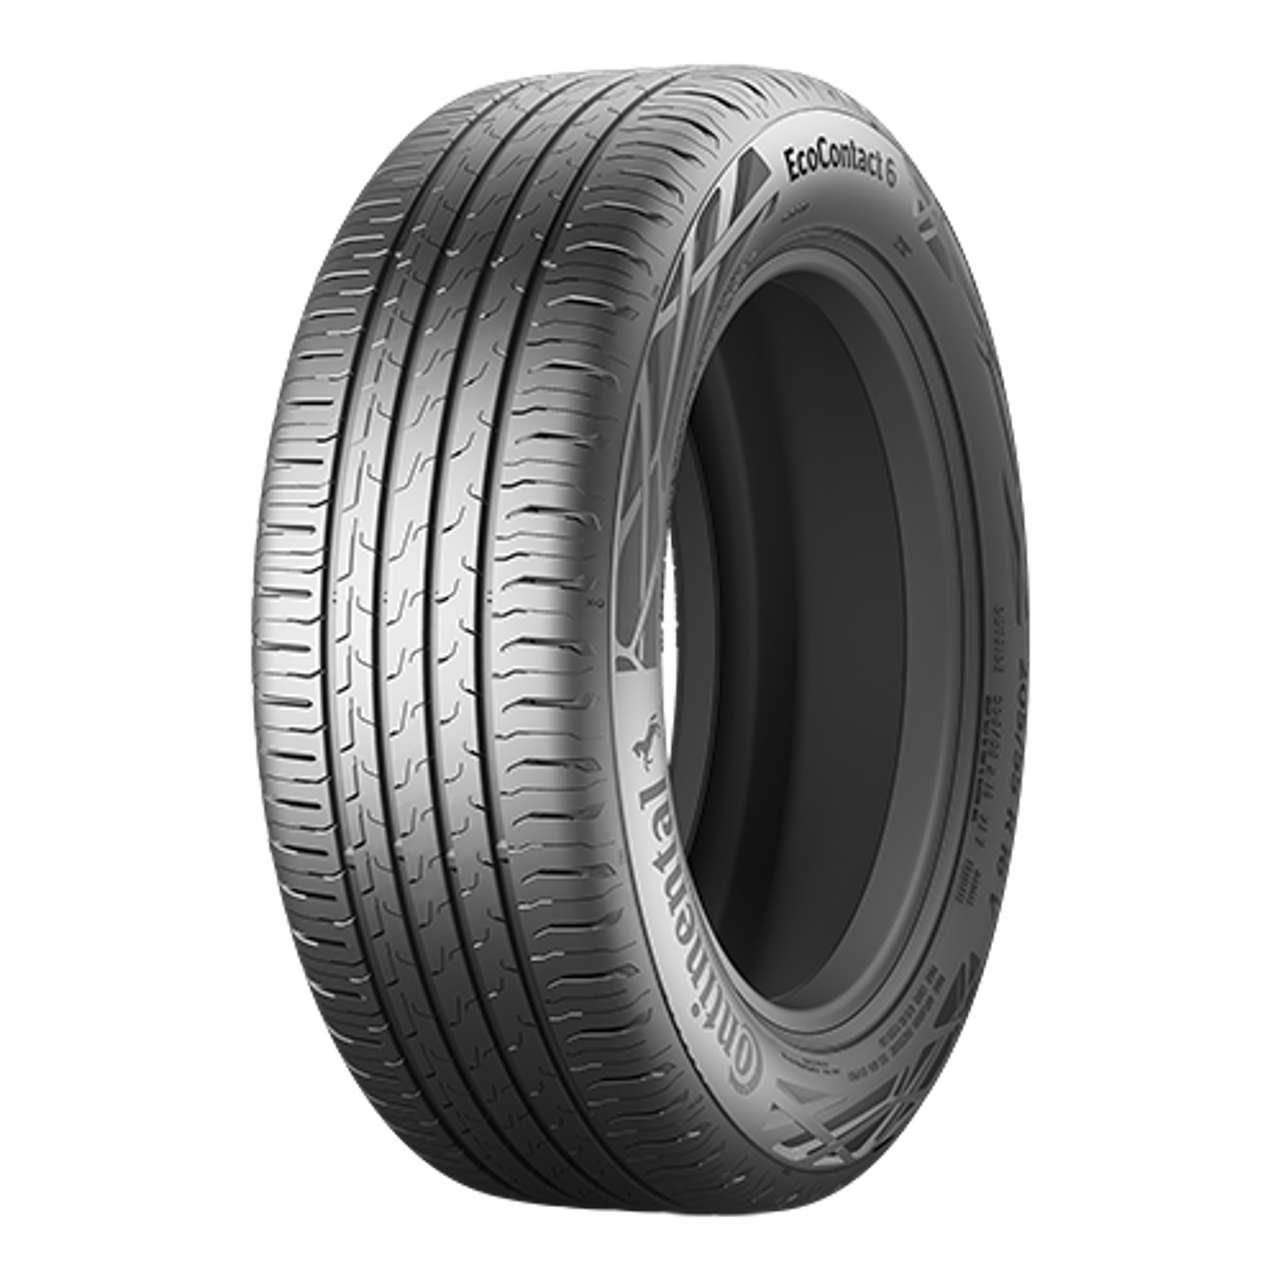 CONTINENTAL ECOCONTACT 6 (*) (EVc) 205/60R16 96W BSW